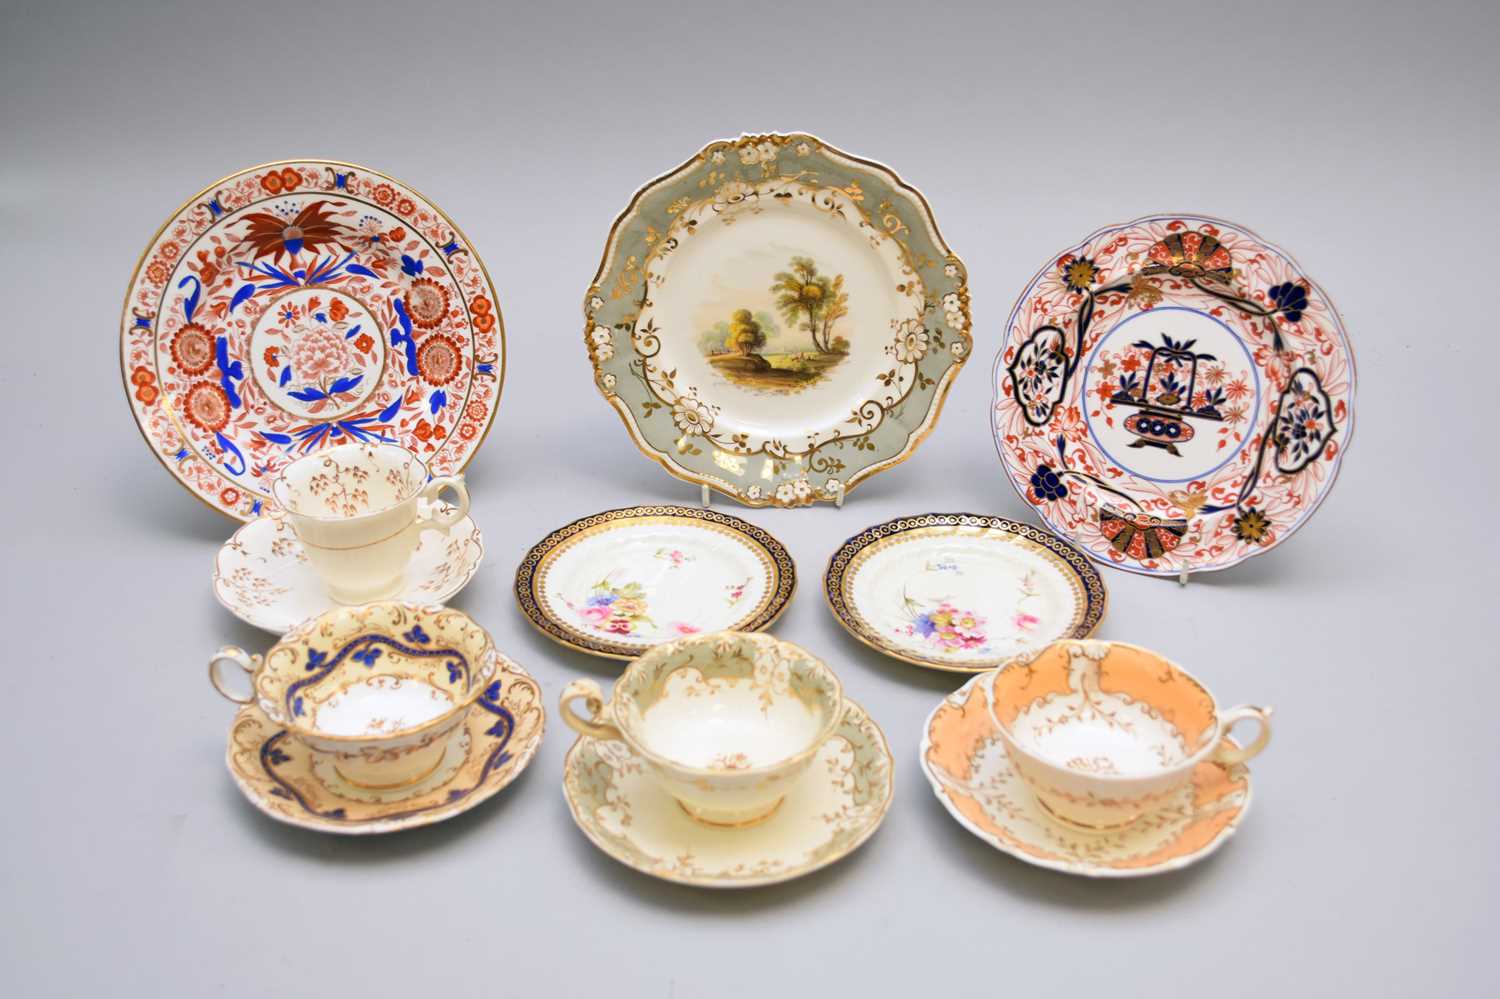 Lot 187 - A group of English and Welsh porcelain tea and coffee wares, early-mid 19th century